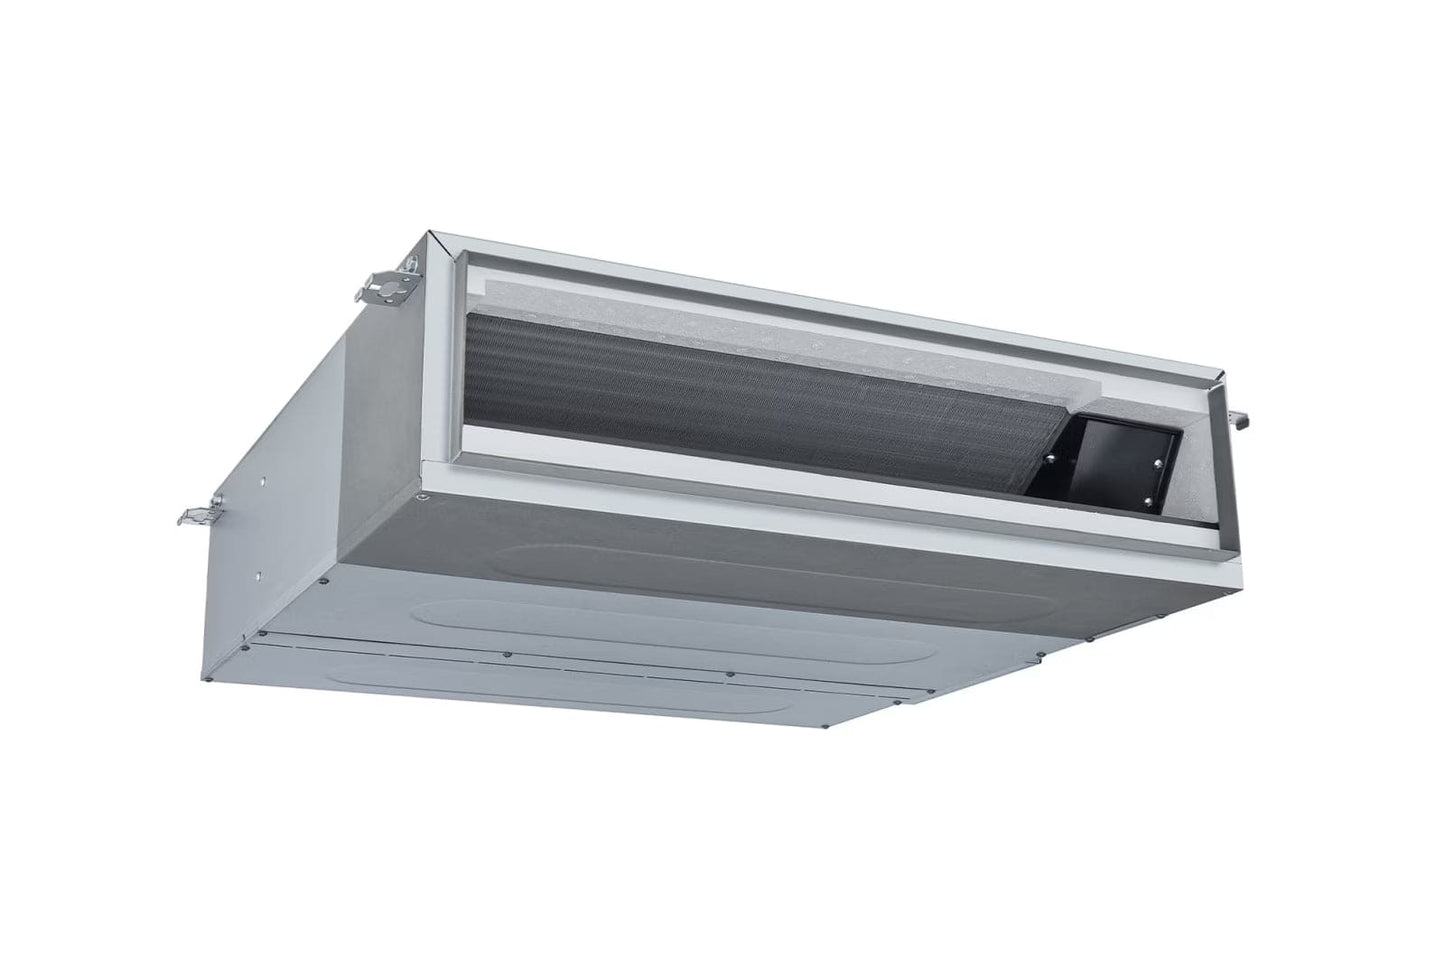 LG Ceiling Concealed Duct Unit 7.1KW with Low Static and E.S.P. Control for Multiple Rooms - ARNU24GL3G2